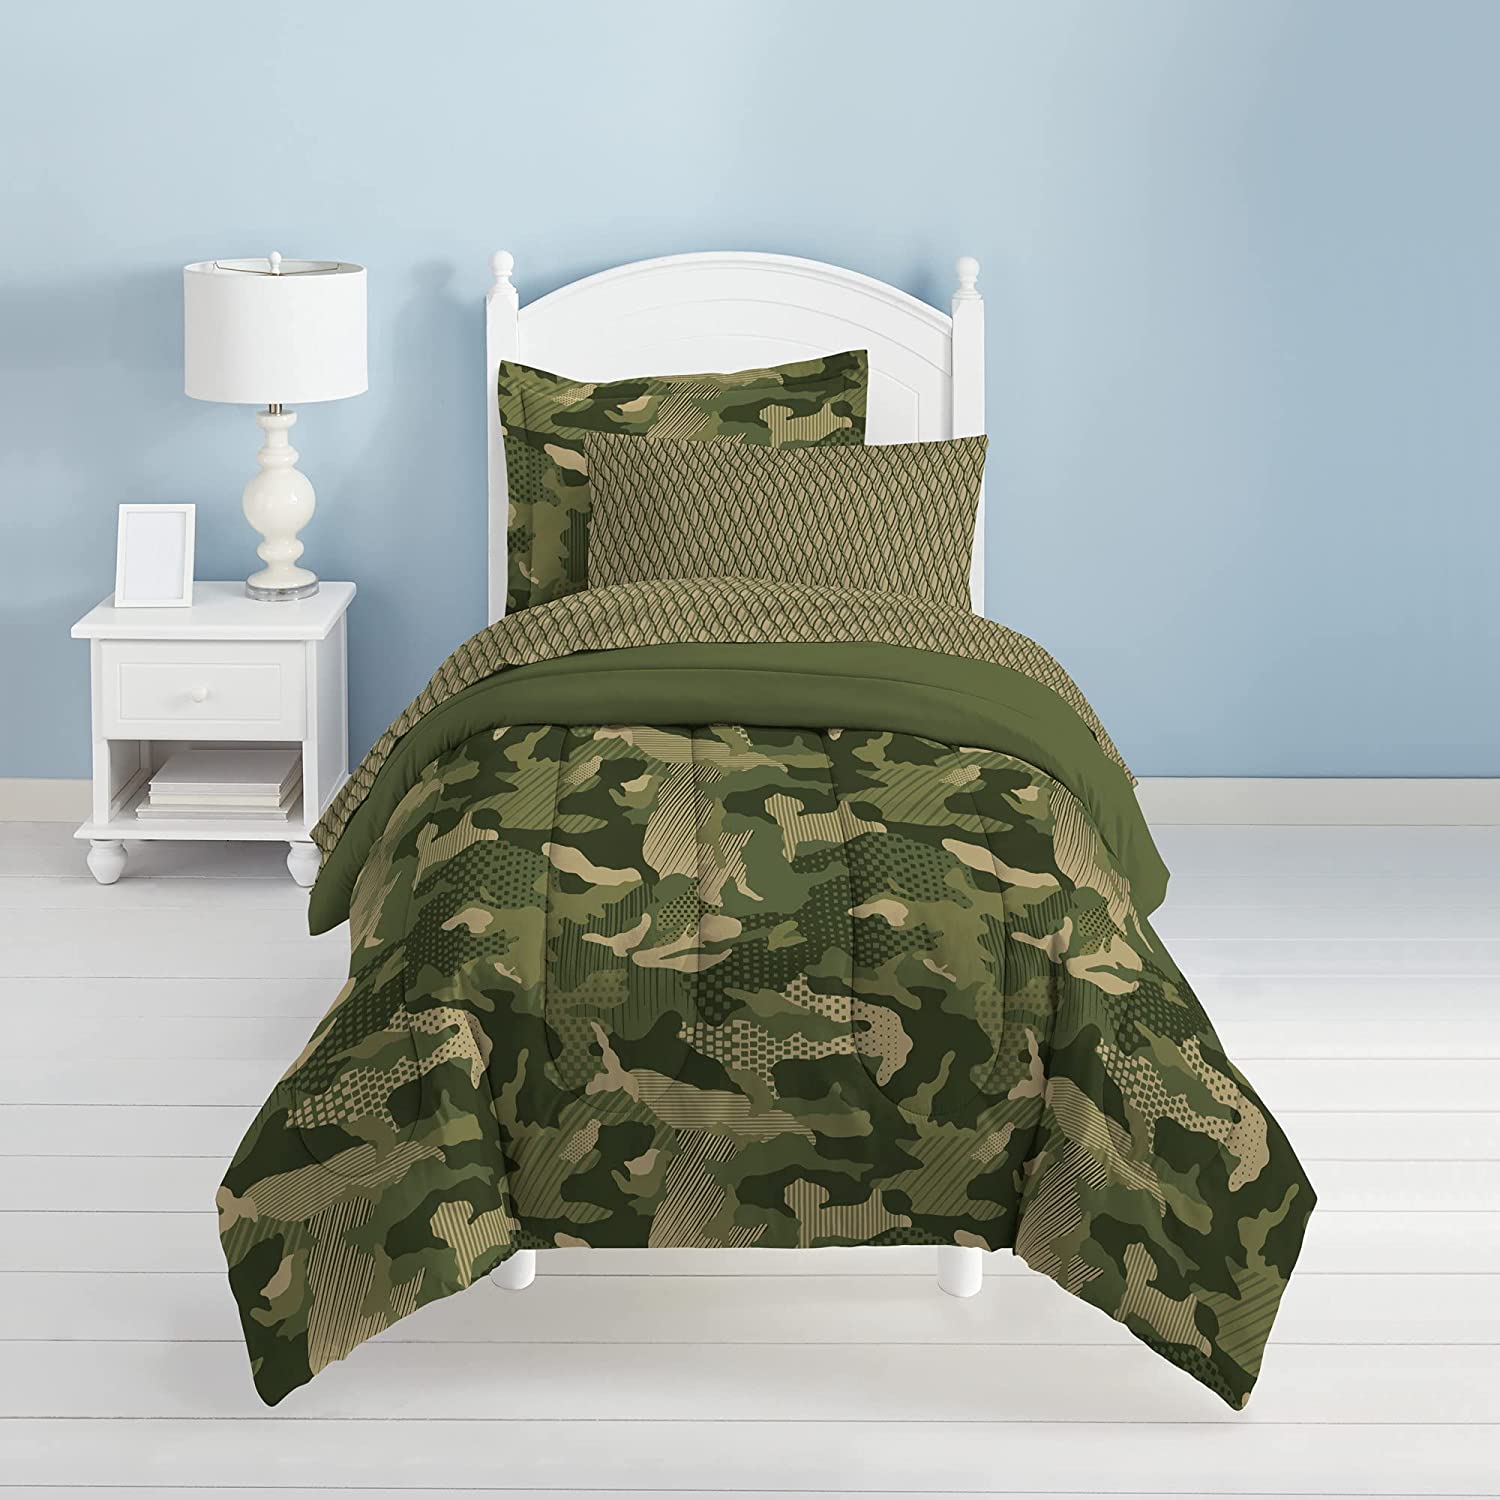 Dream Factory Geo Camo Twin 5 Piece Comforter Set, Bed-in-a-Bag, Cotton/Polyester, Camouflage, Multi, Unisex, Child - image 2 of 12